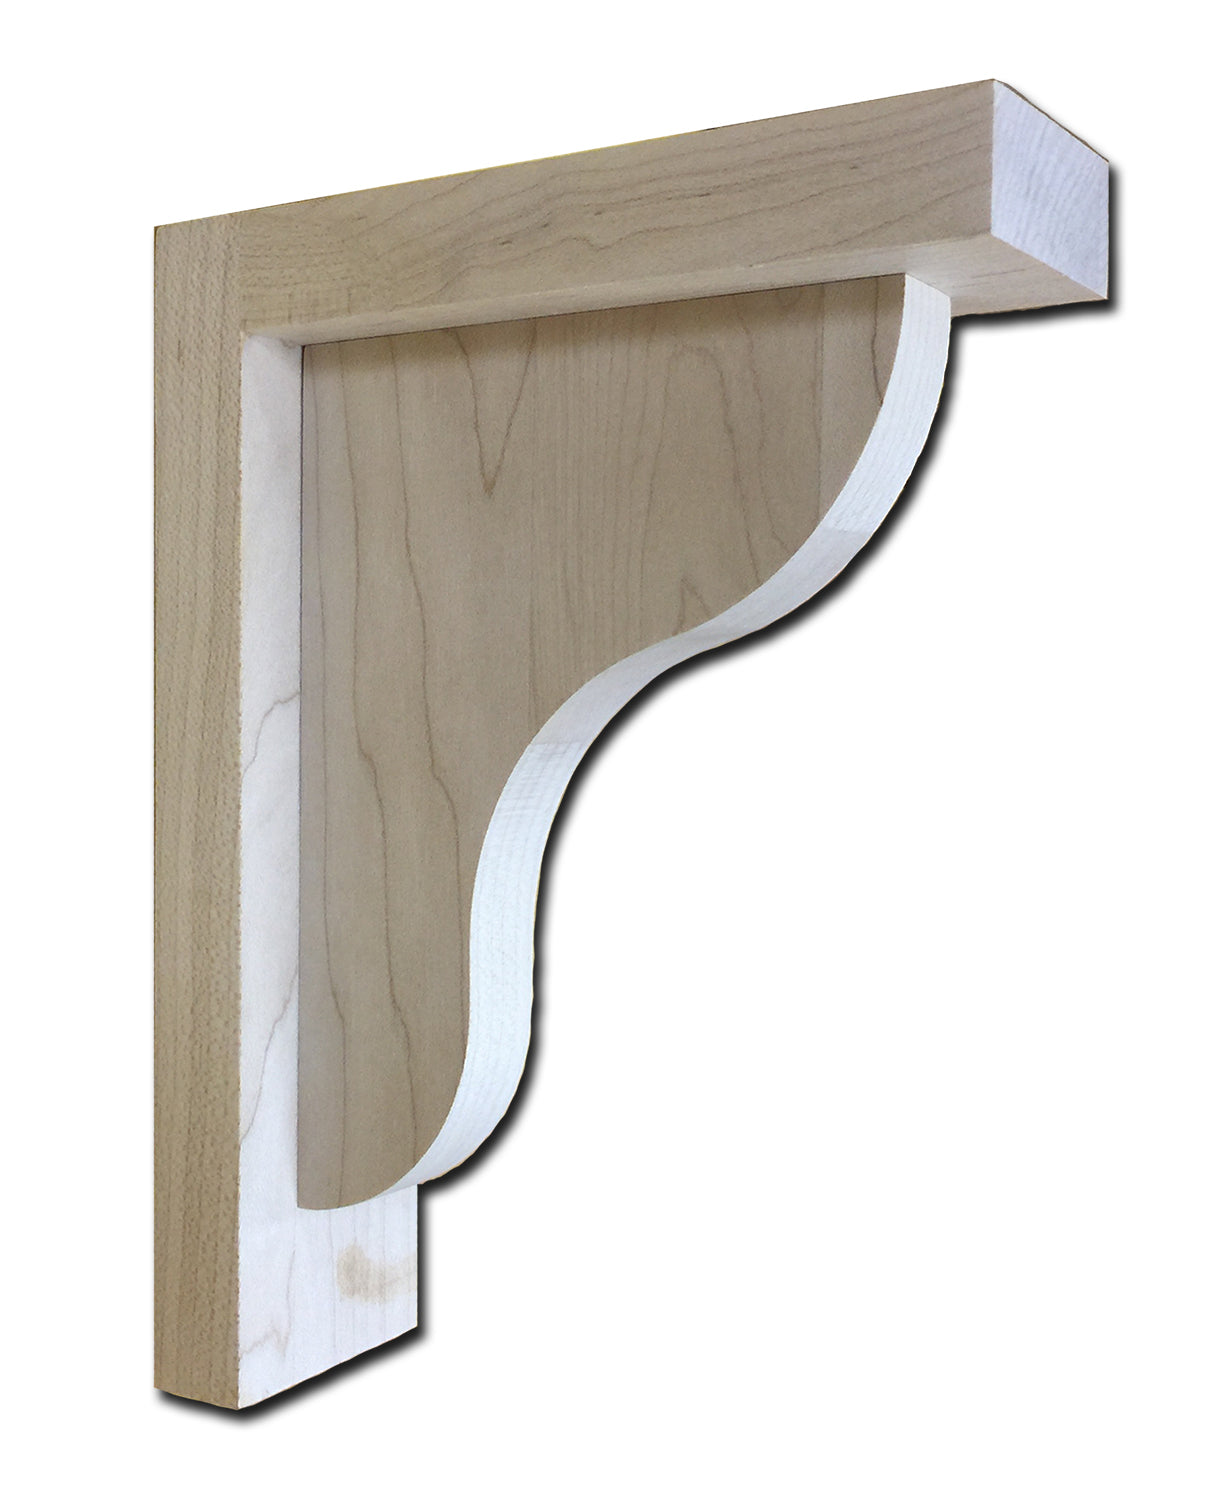 Castlewood SY-CA-BB13 Countertop Support